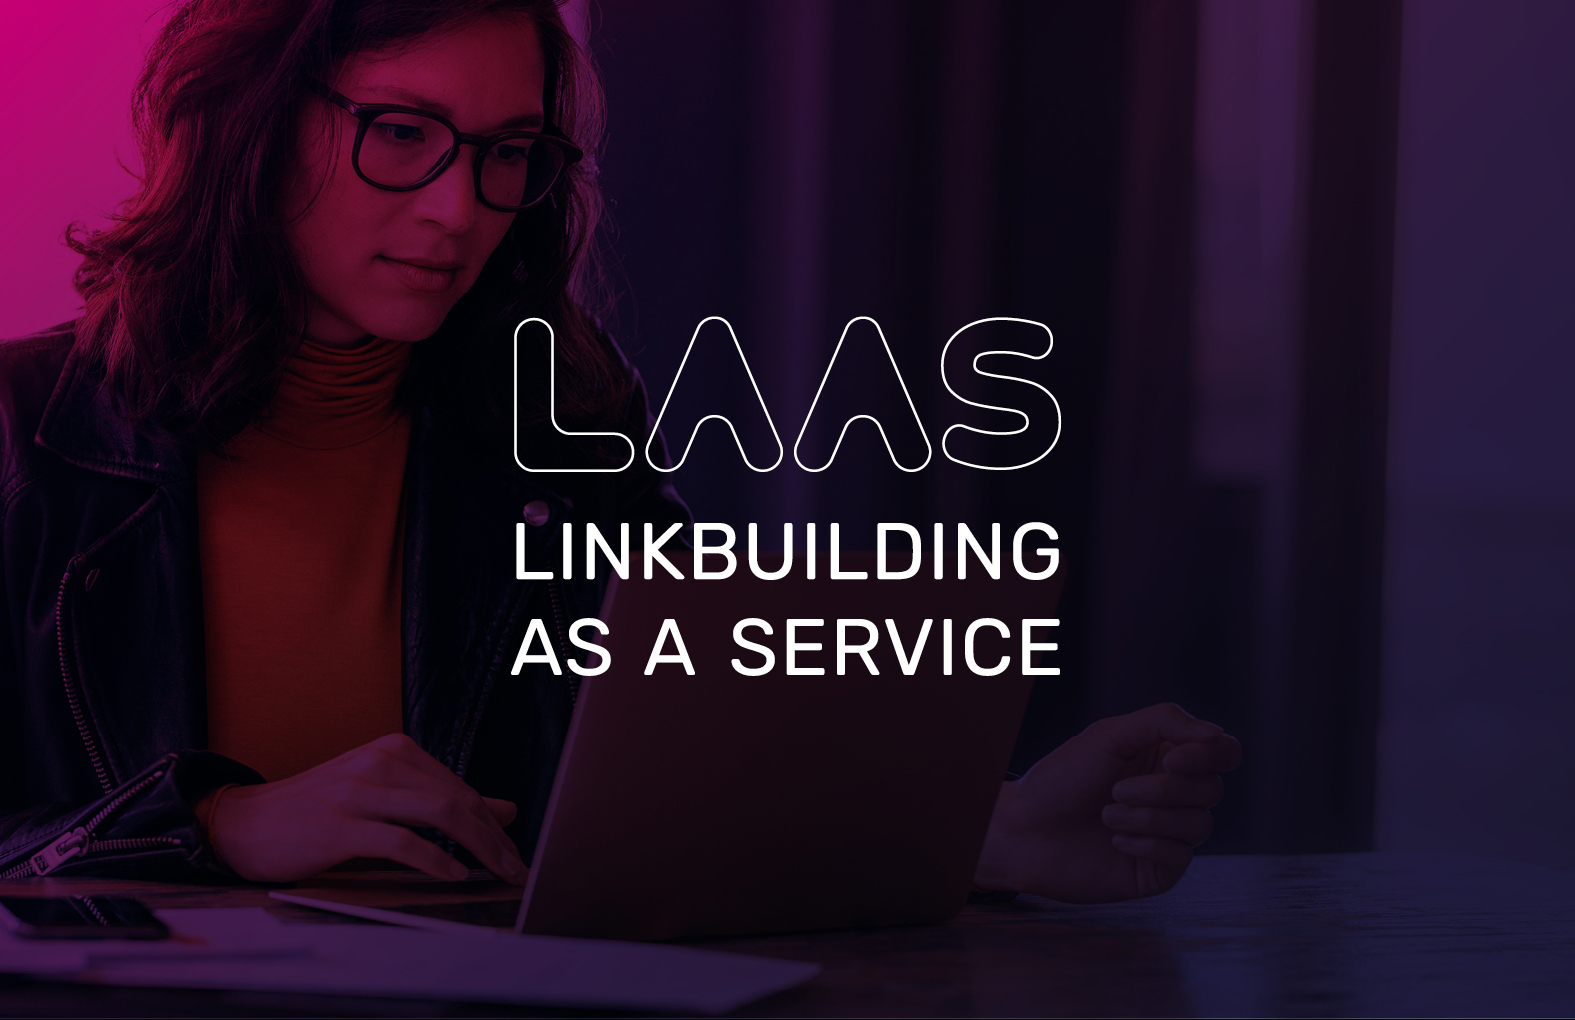 LAAS: the new linkbuilding service. - 